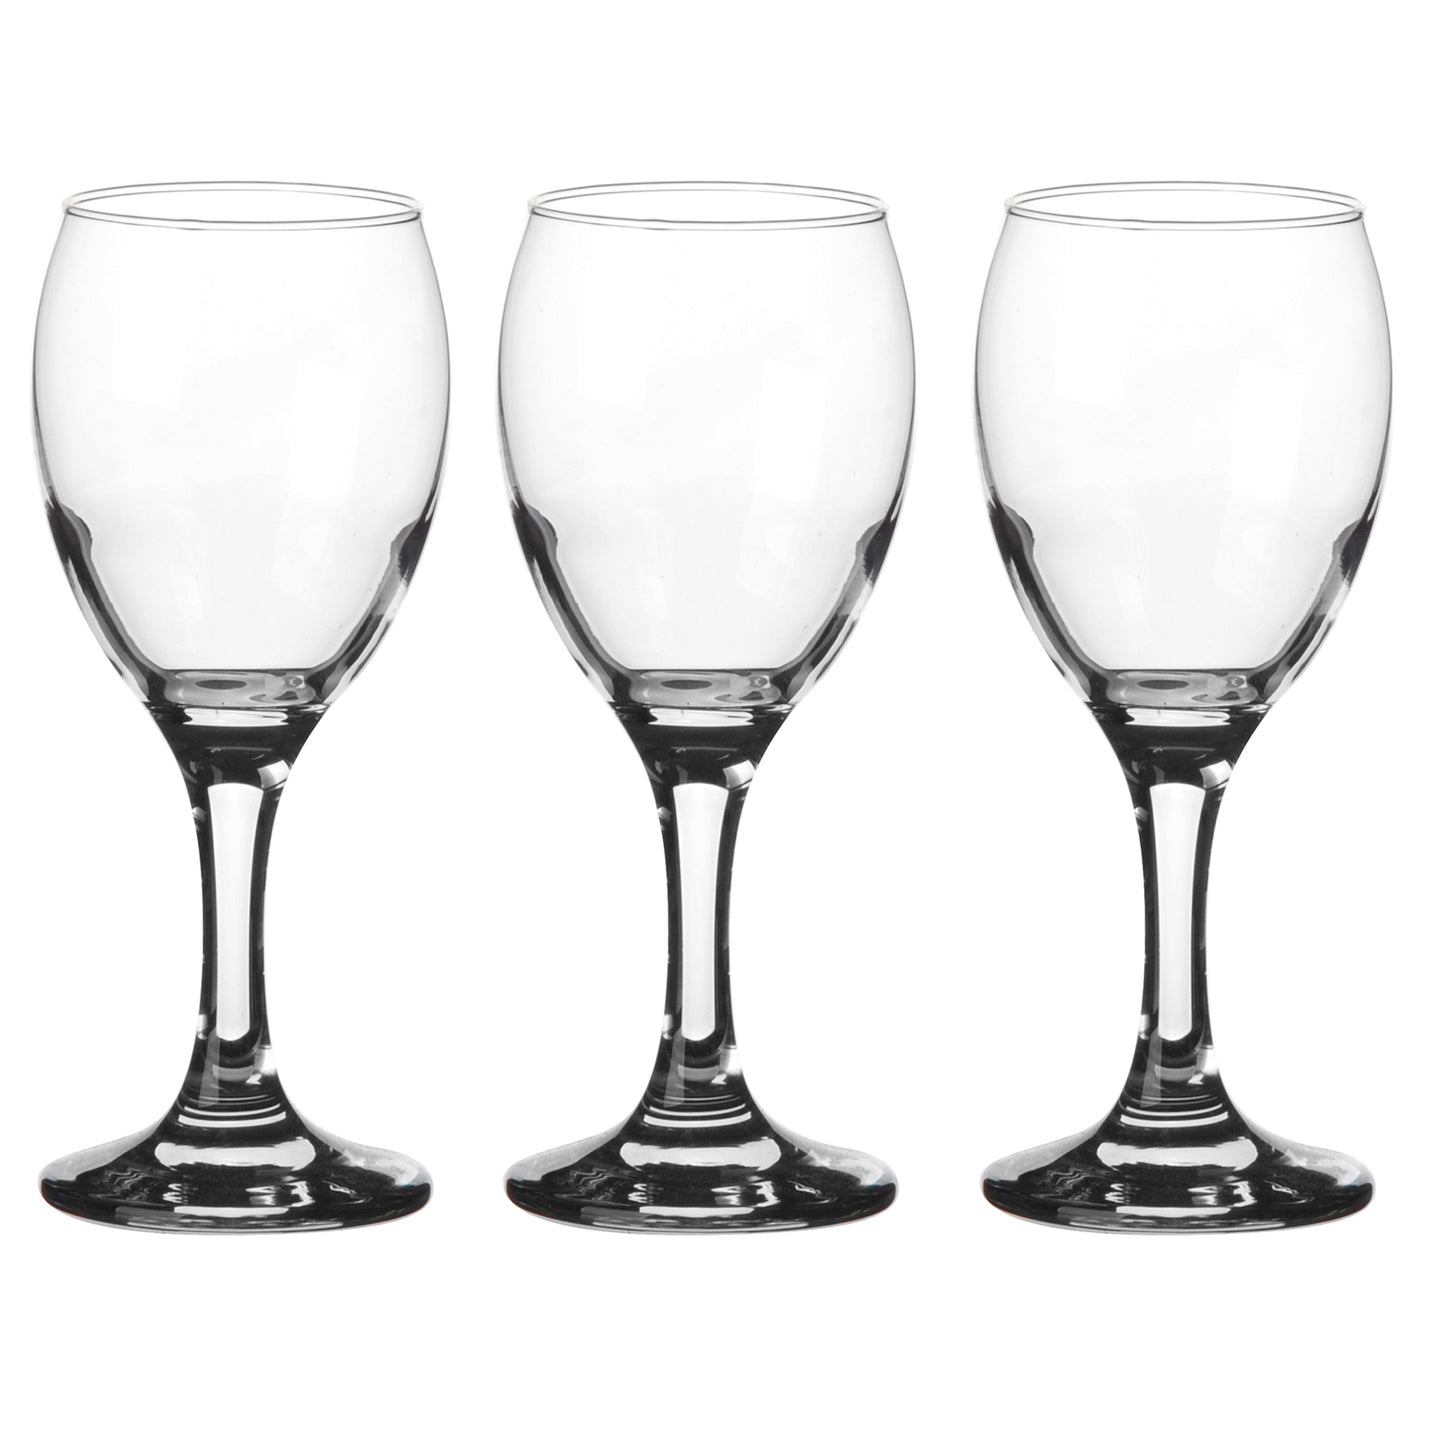 Set of Small 190ml Small Wine Glasses - Suitable for sherry, gin, wine and more